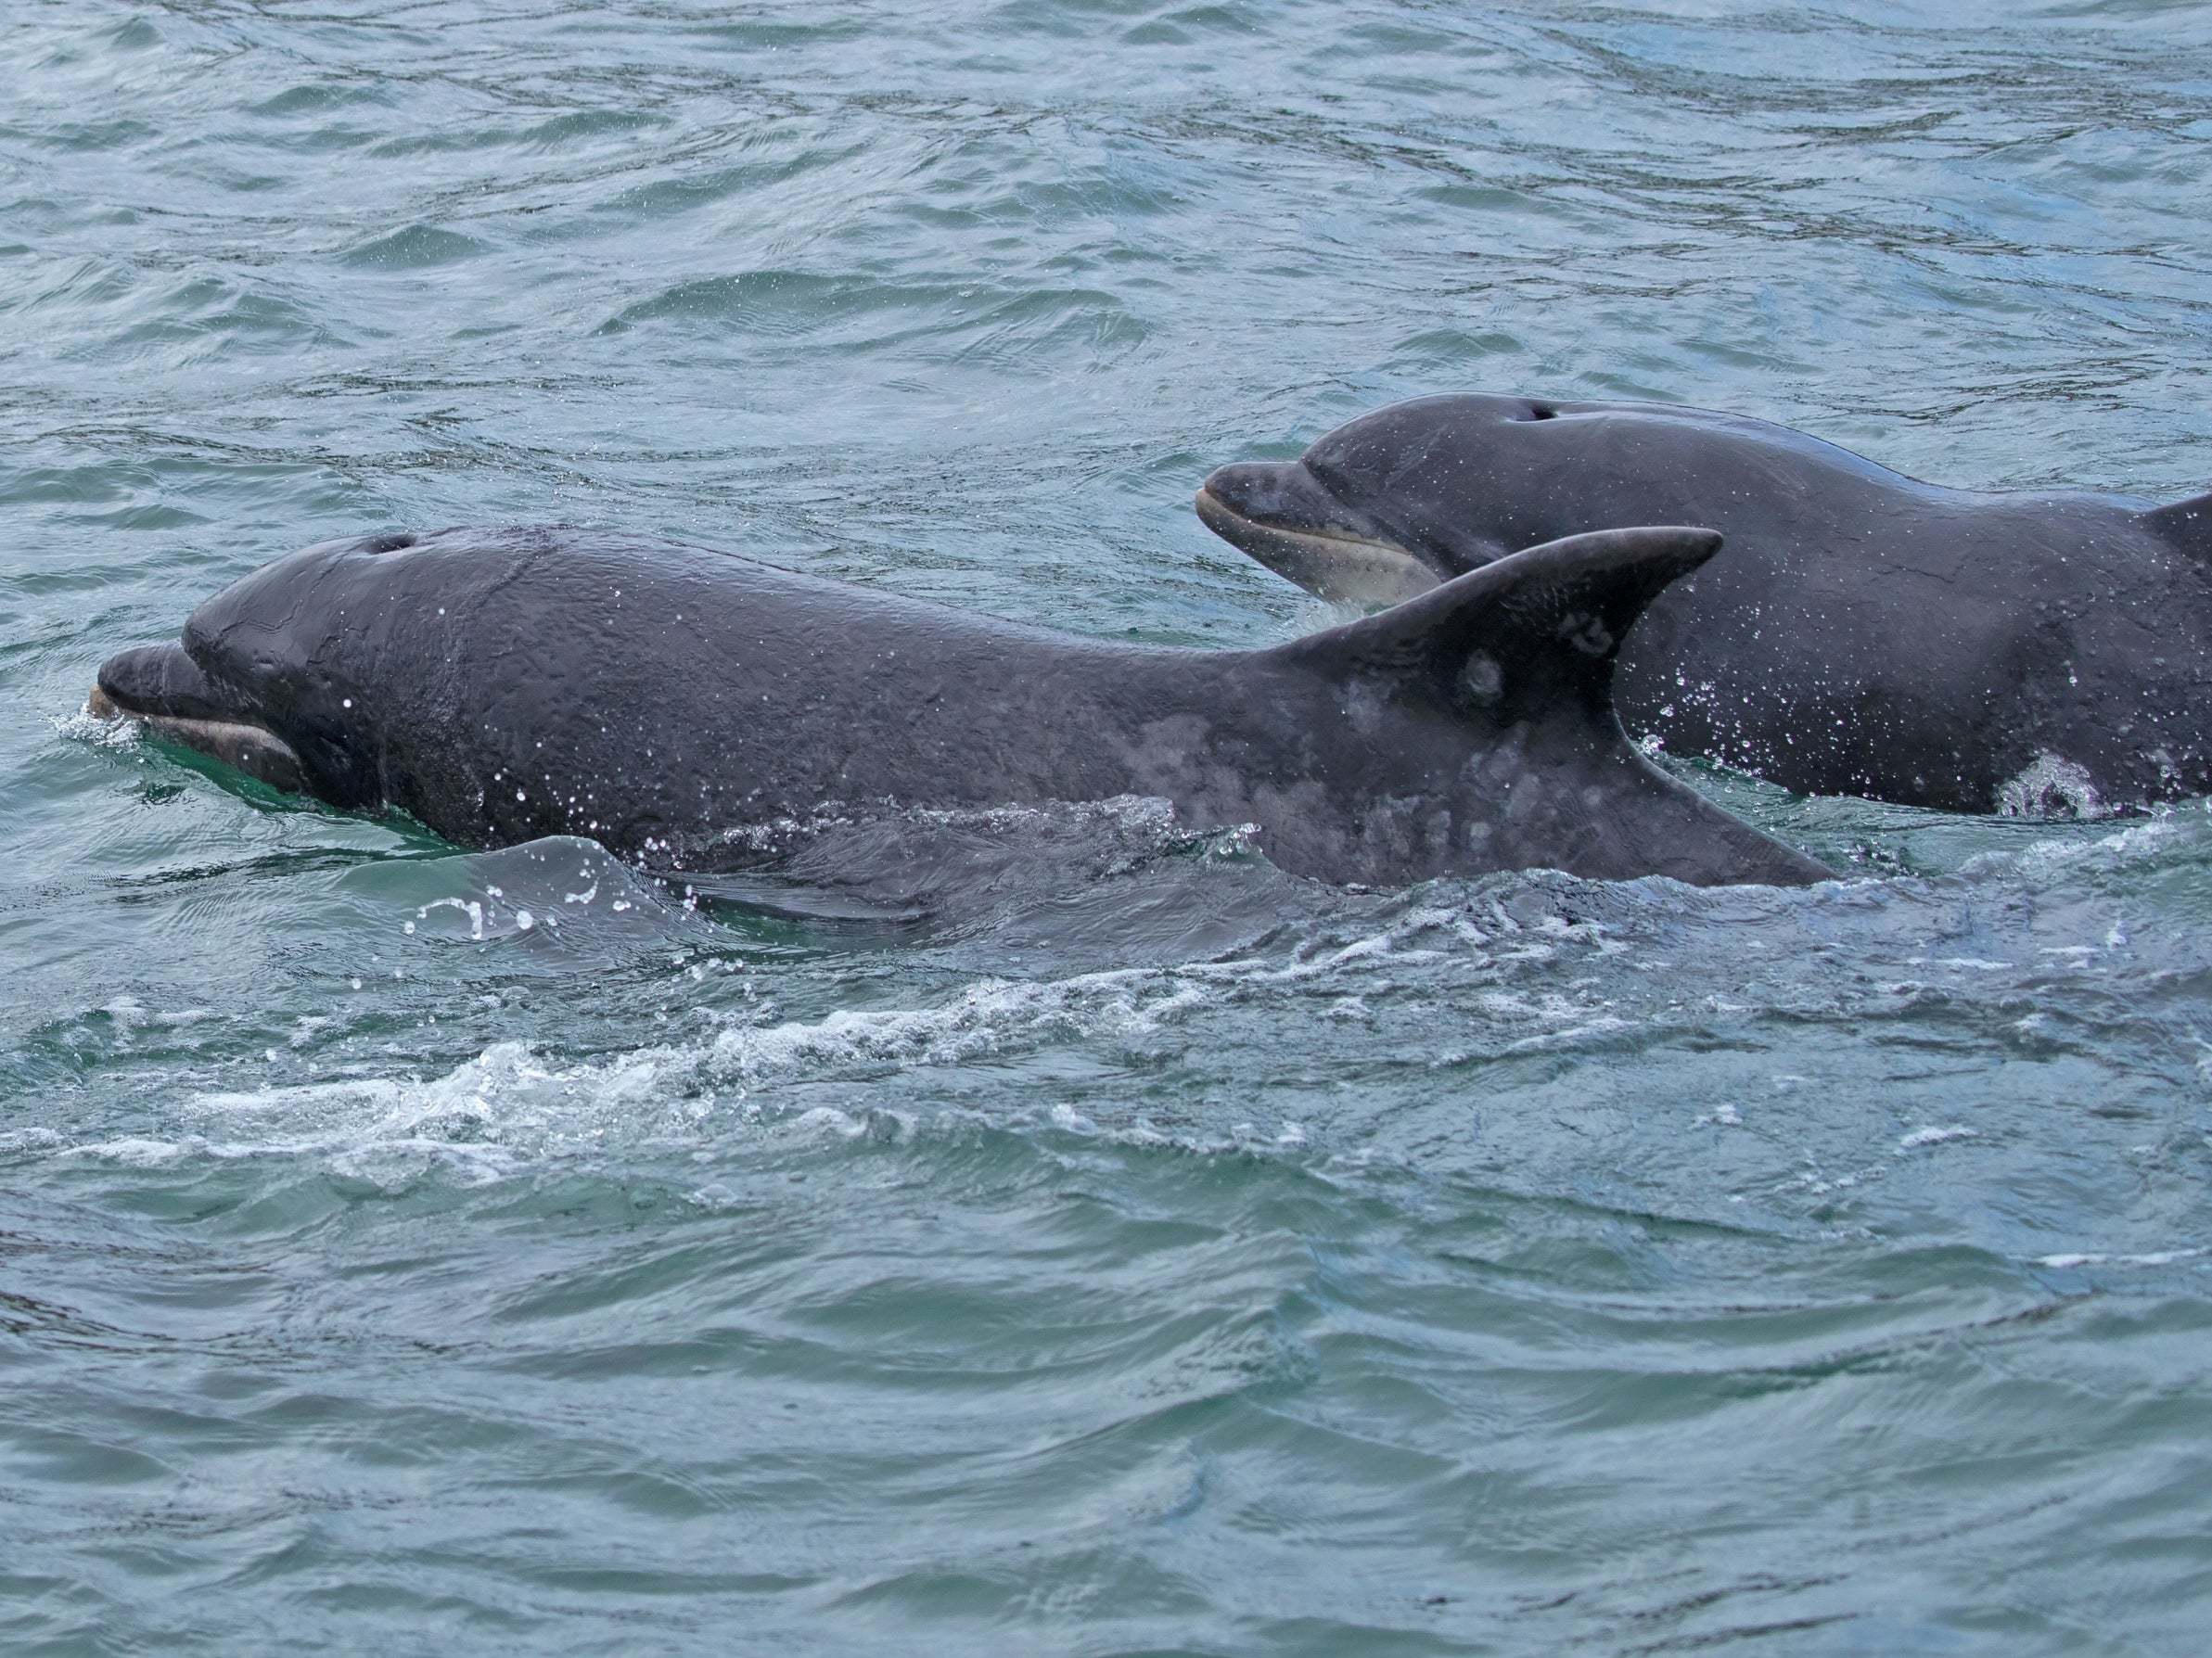 Bottlenose dolphins from Scotland were officially recorded off the coast of Yorkshire for the first time